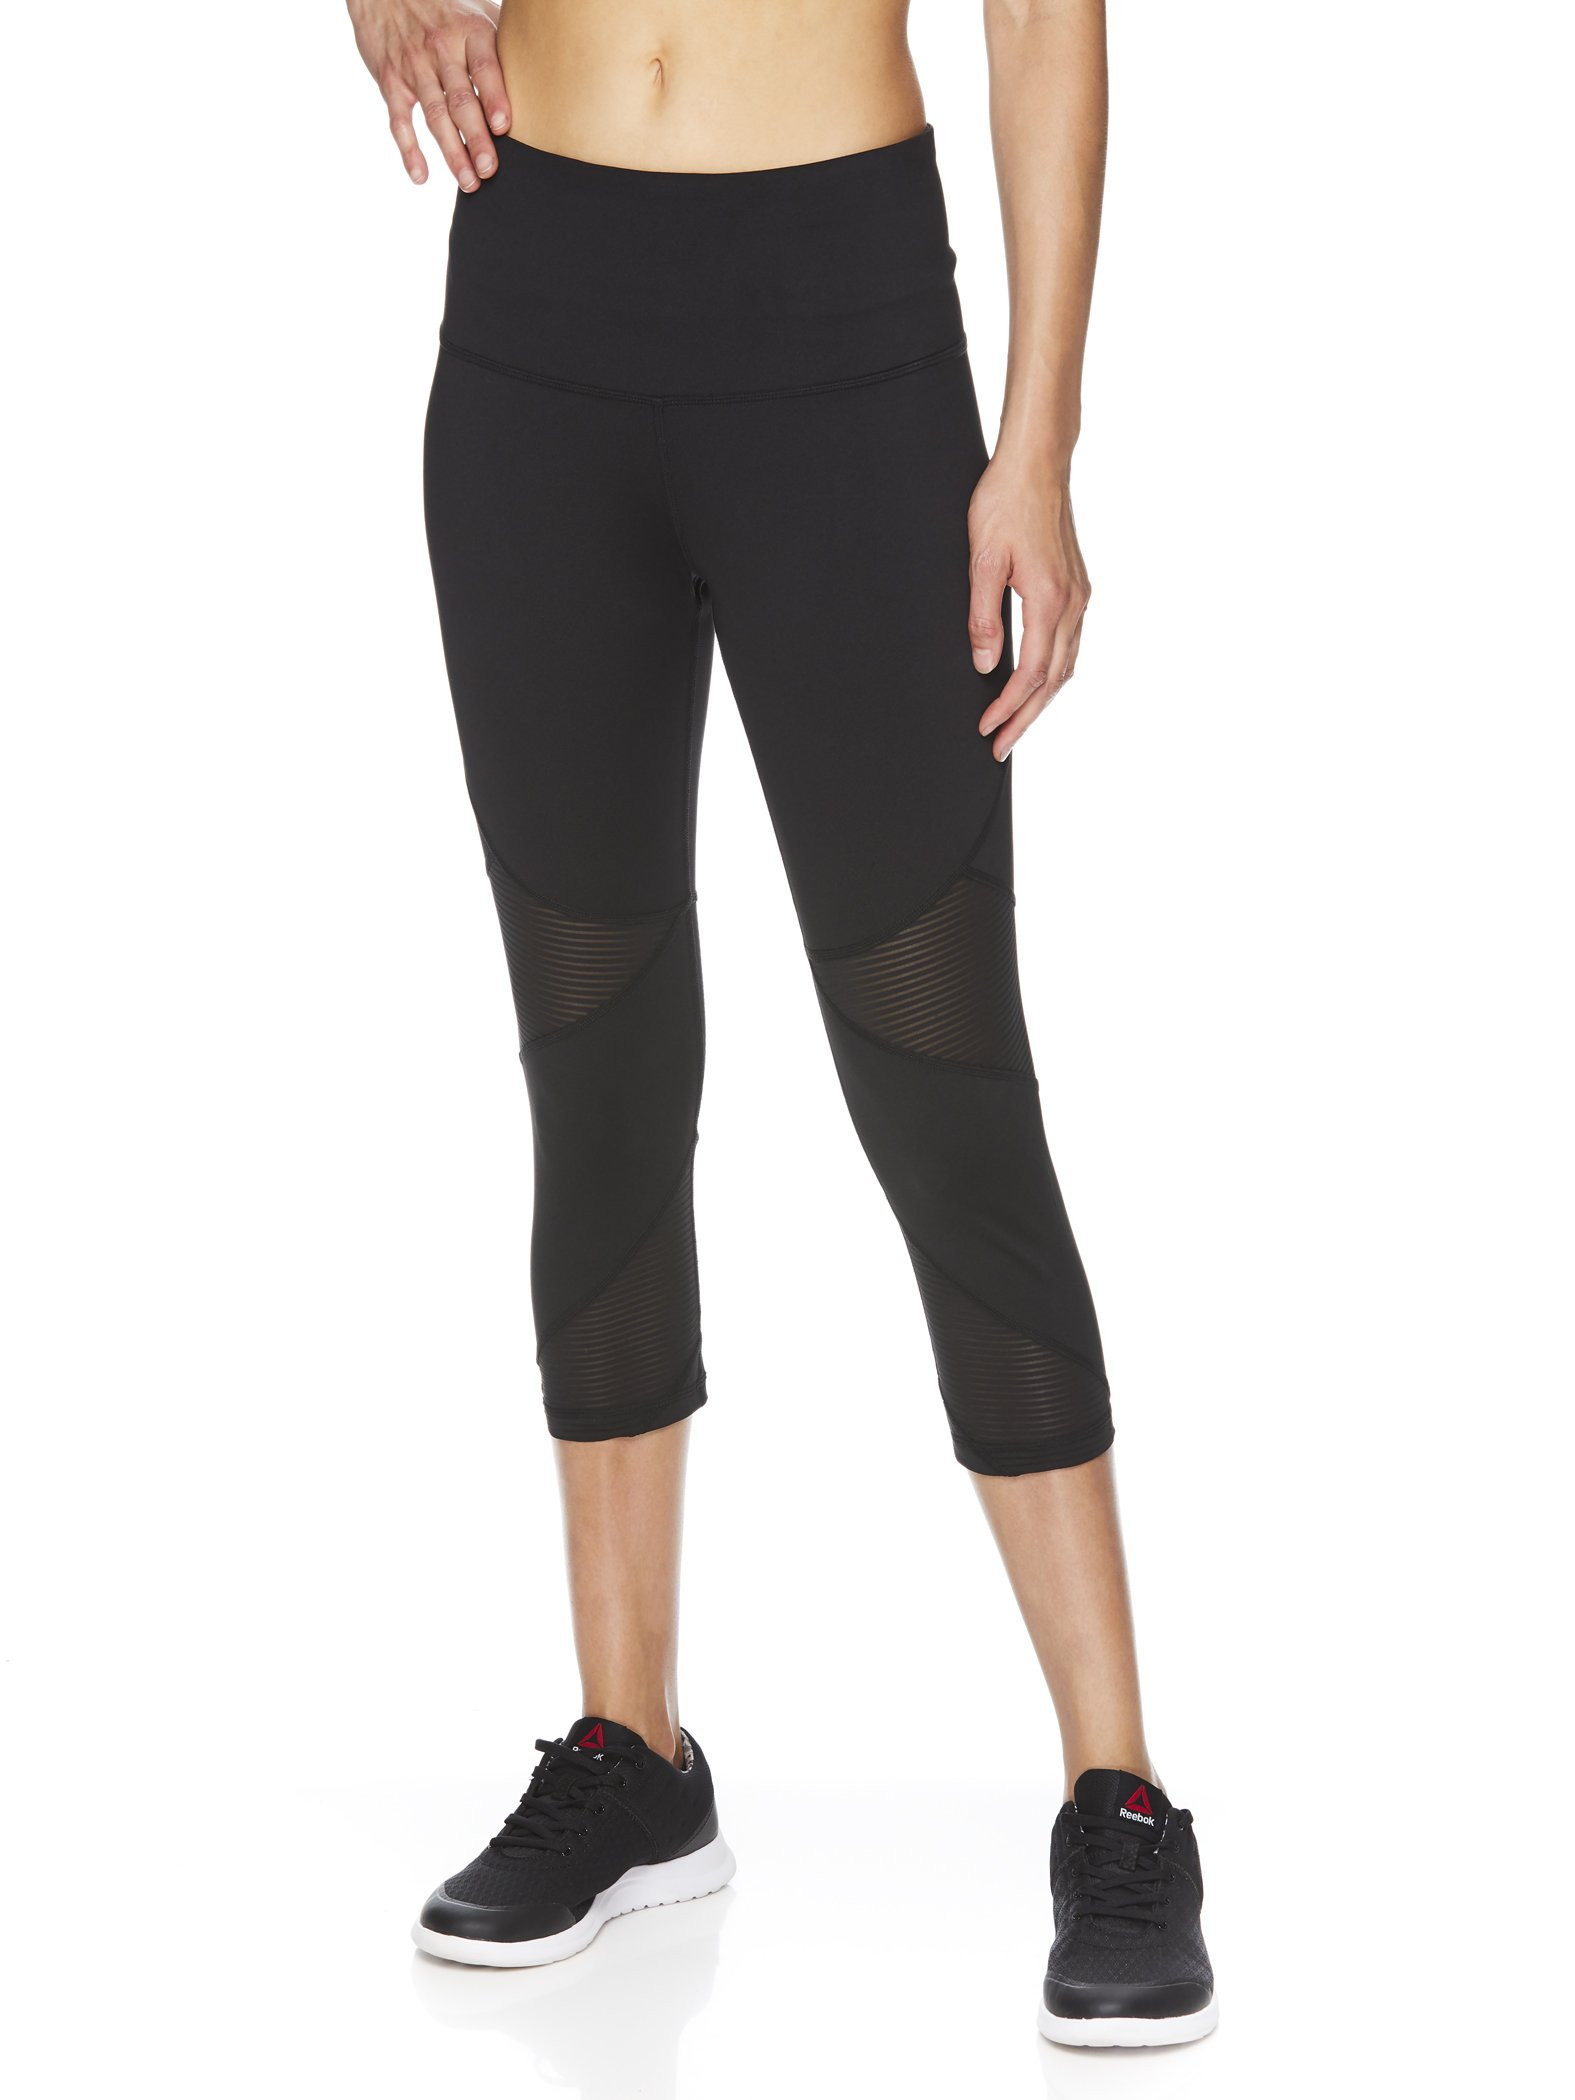 These athletic capris are the perfect fitted capri for when you want to add some fun and color to your athleisure wardrobe. Product Features VERSATILE: Reebok high waisted workout capris are perfect for yoga, running, and everything in between. Never miss #capri